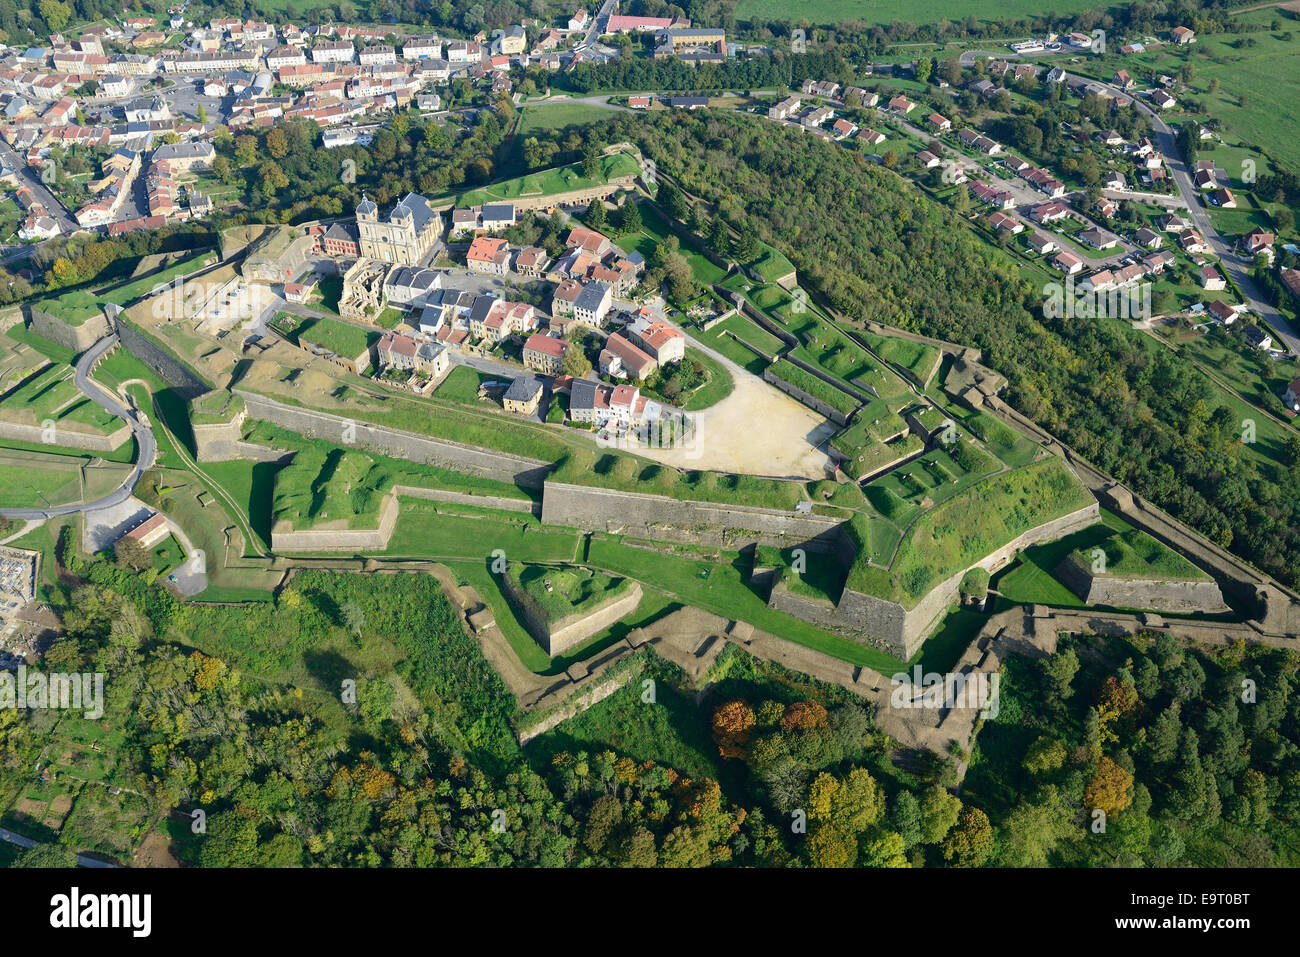 AERIAL VIEW. Medieval citadel on a hilltop overlooking the newer town. Montmedy, Meuse, Lorraine, Grand Est, France. Stock Photo